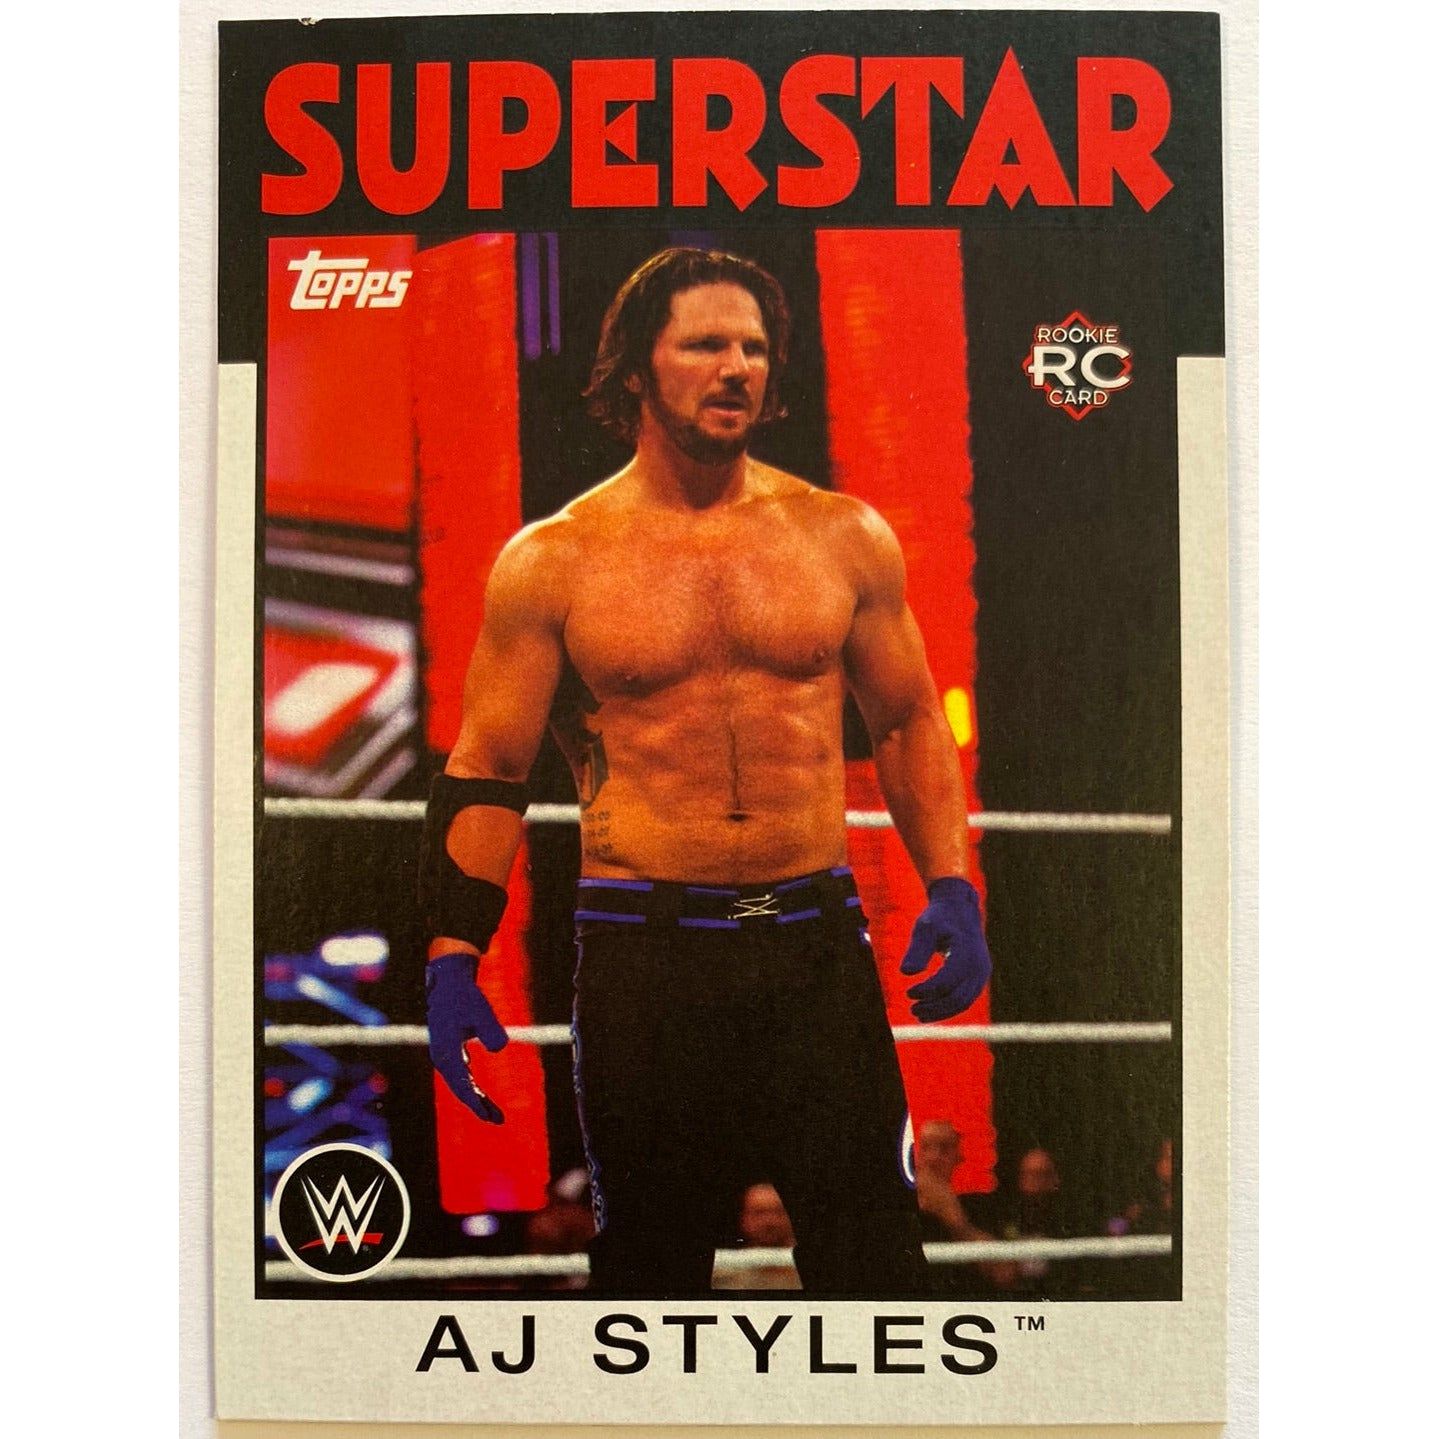  2016 Topps Heritage WWE AJ Styles RC  Local Legends Cards & Collectibles